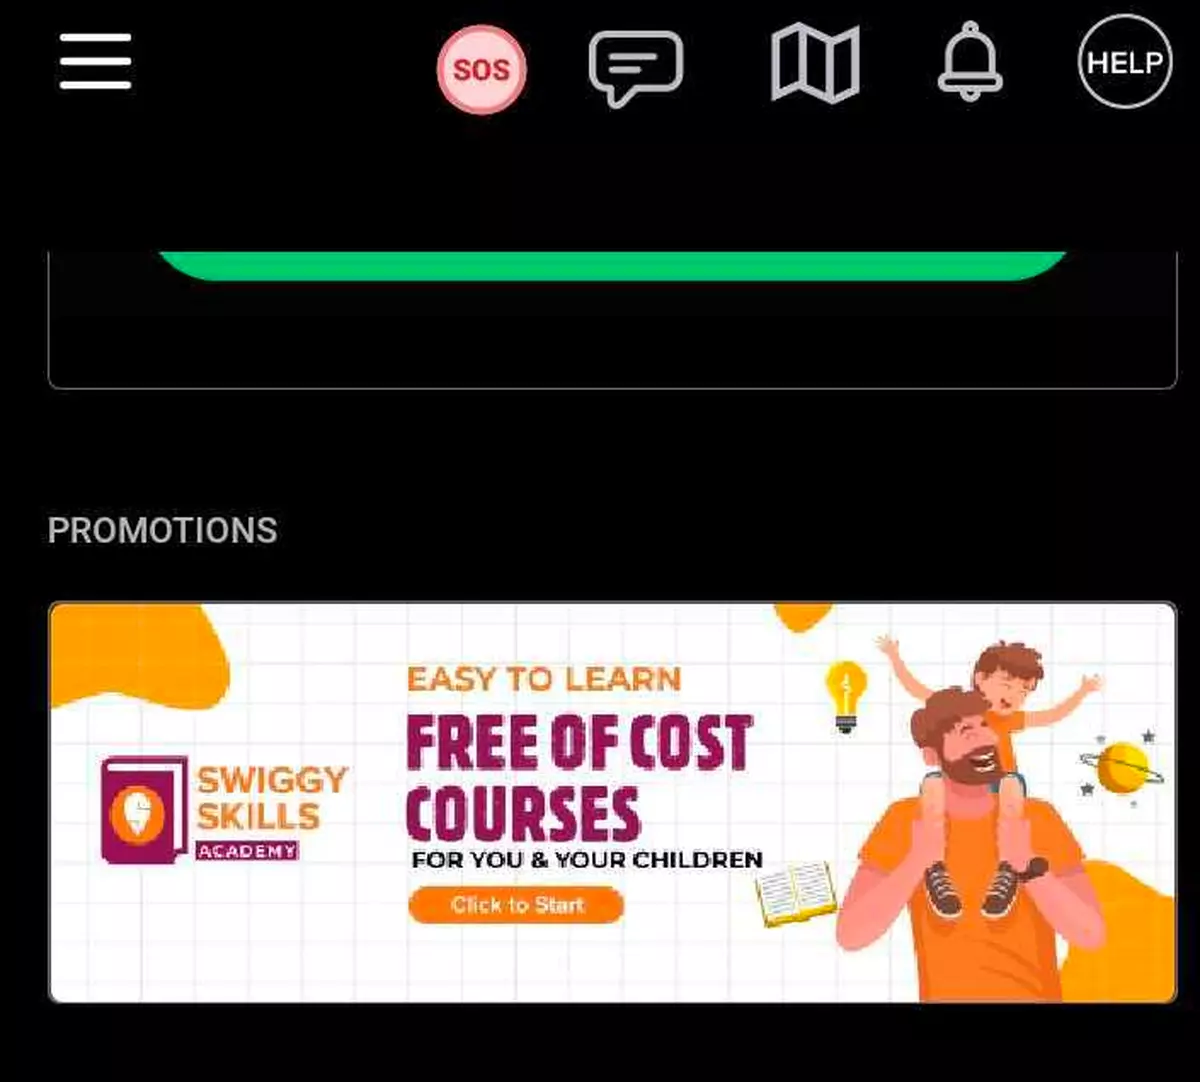 Swiggy Skills banner as seen on the Delivery executive’s app